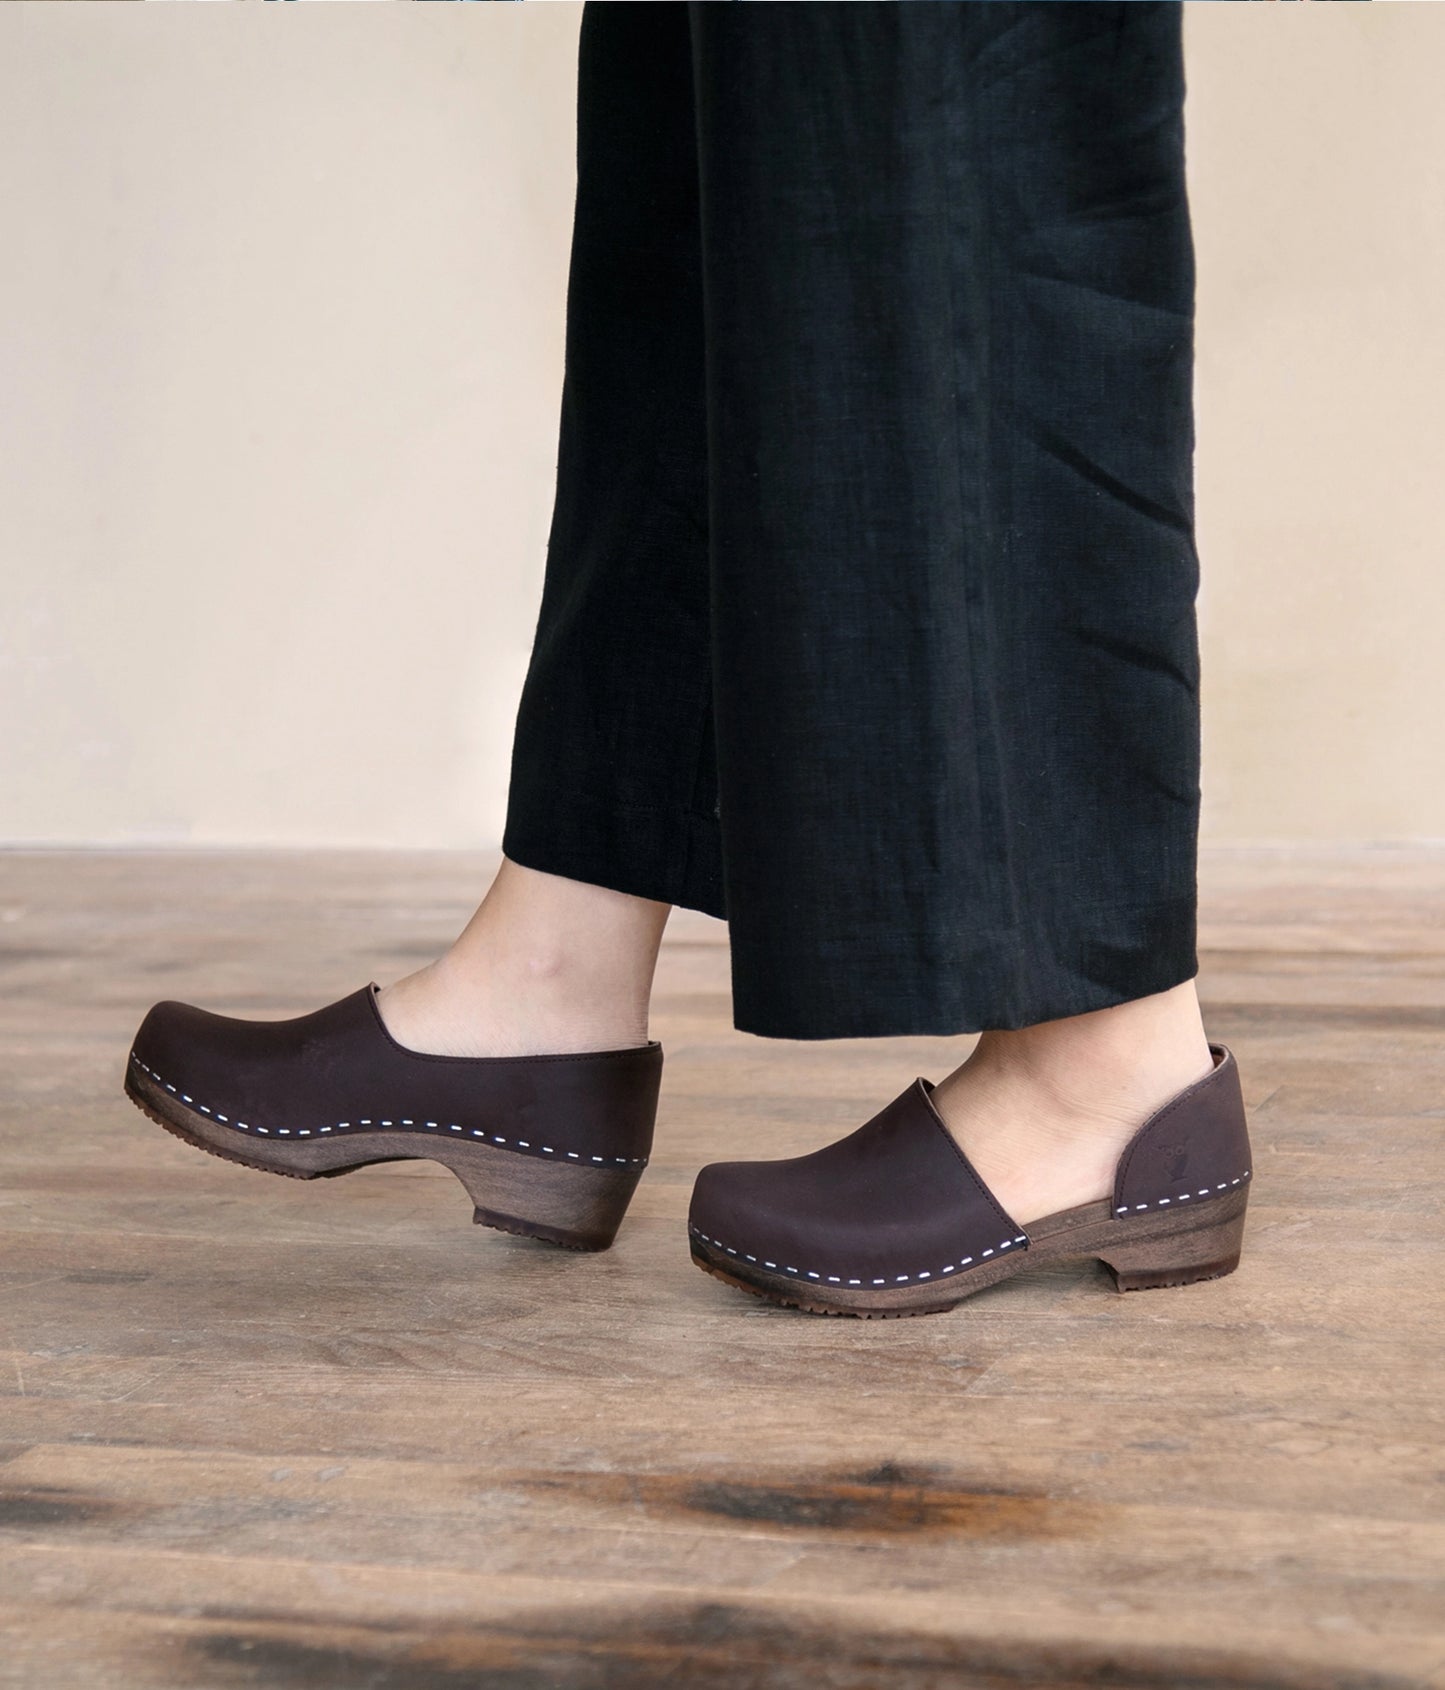 low heeled closed-back clogs in dark brown nubuck leather stapled on a dark wooden base